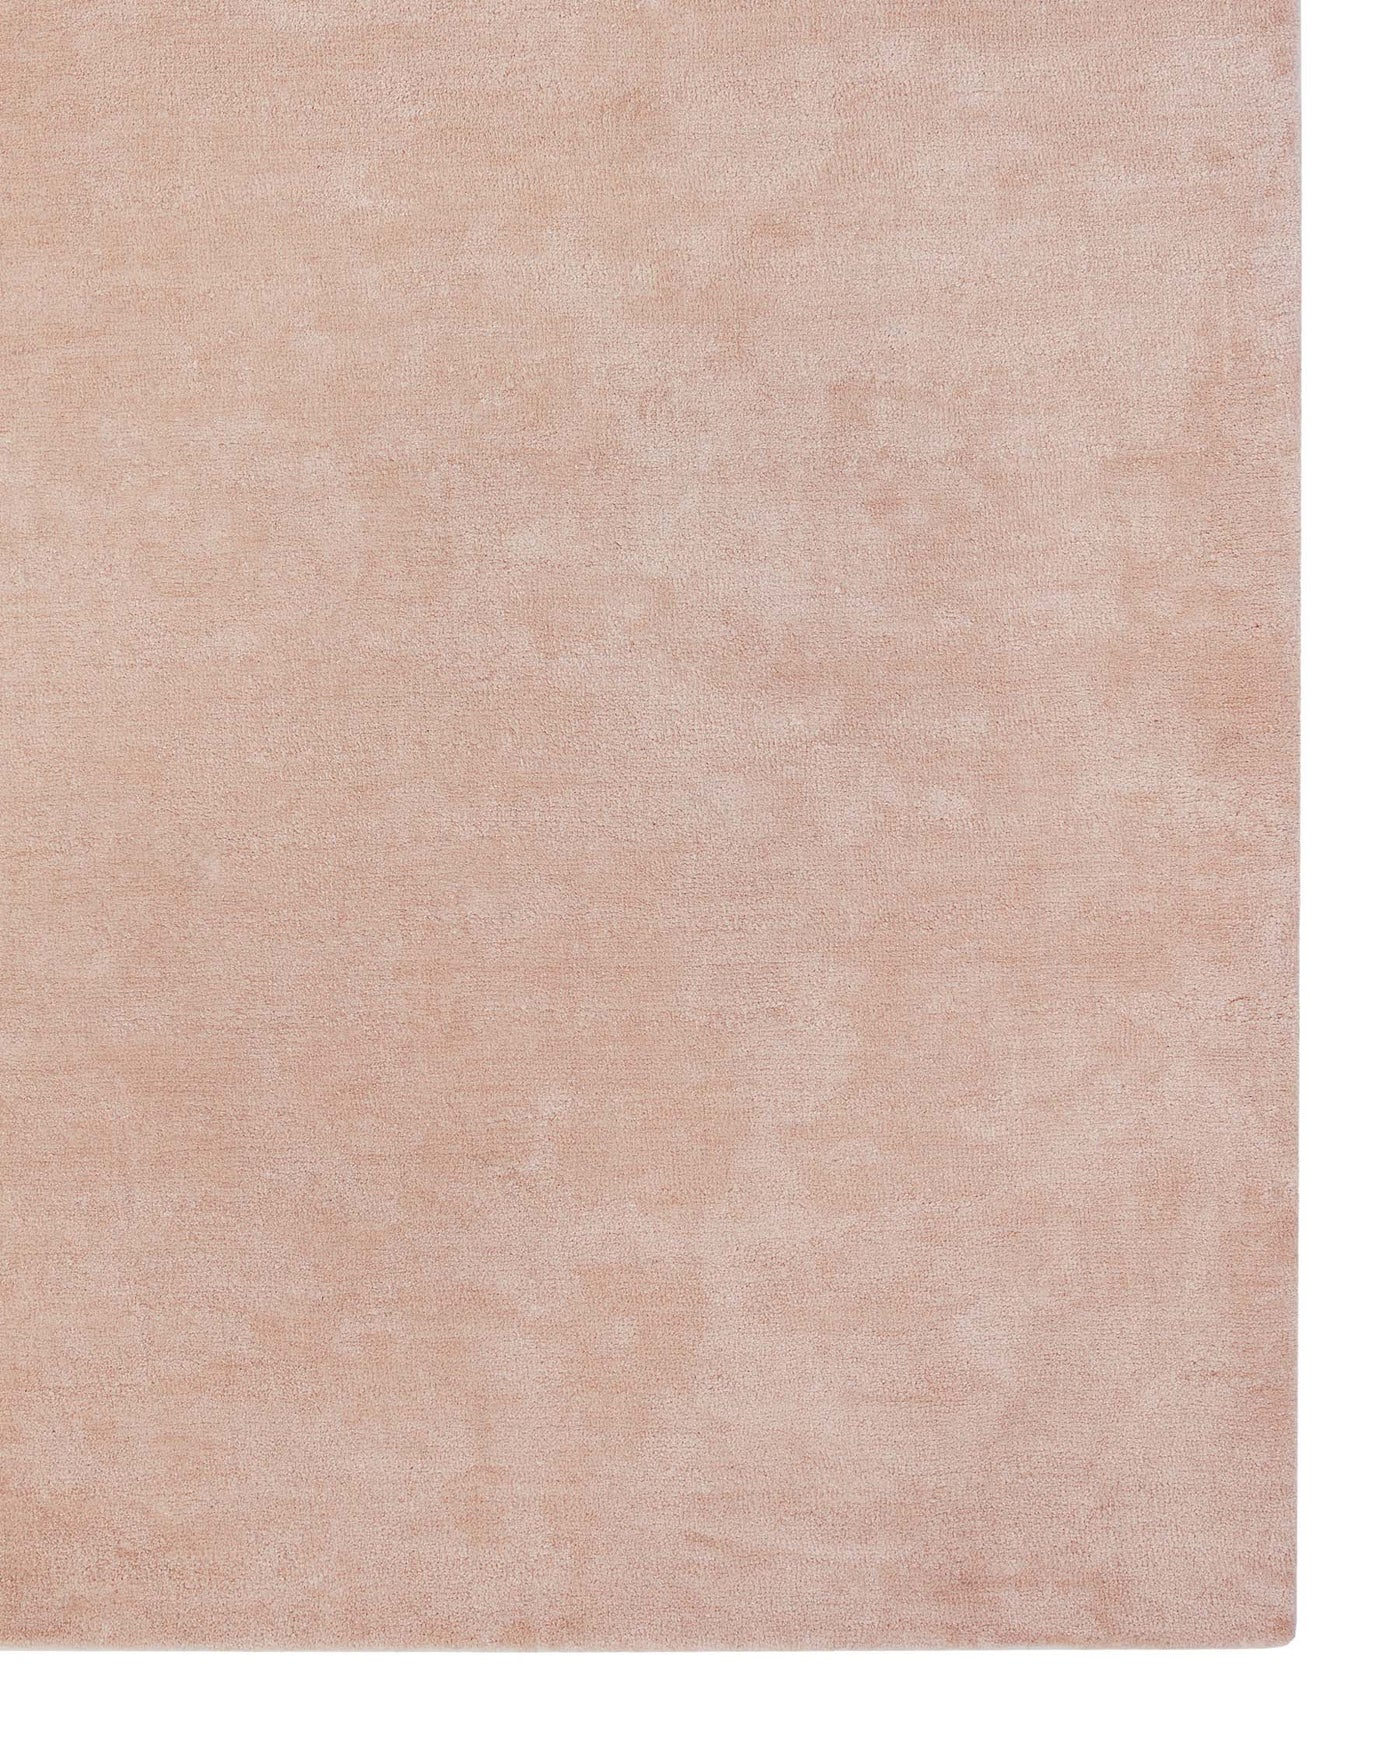 No furniture is visible; the image displays a solid blush pink-coloured rug with a subtle textured finish.